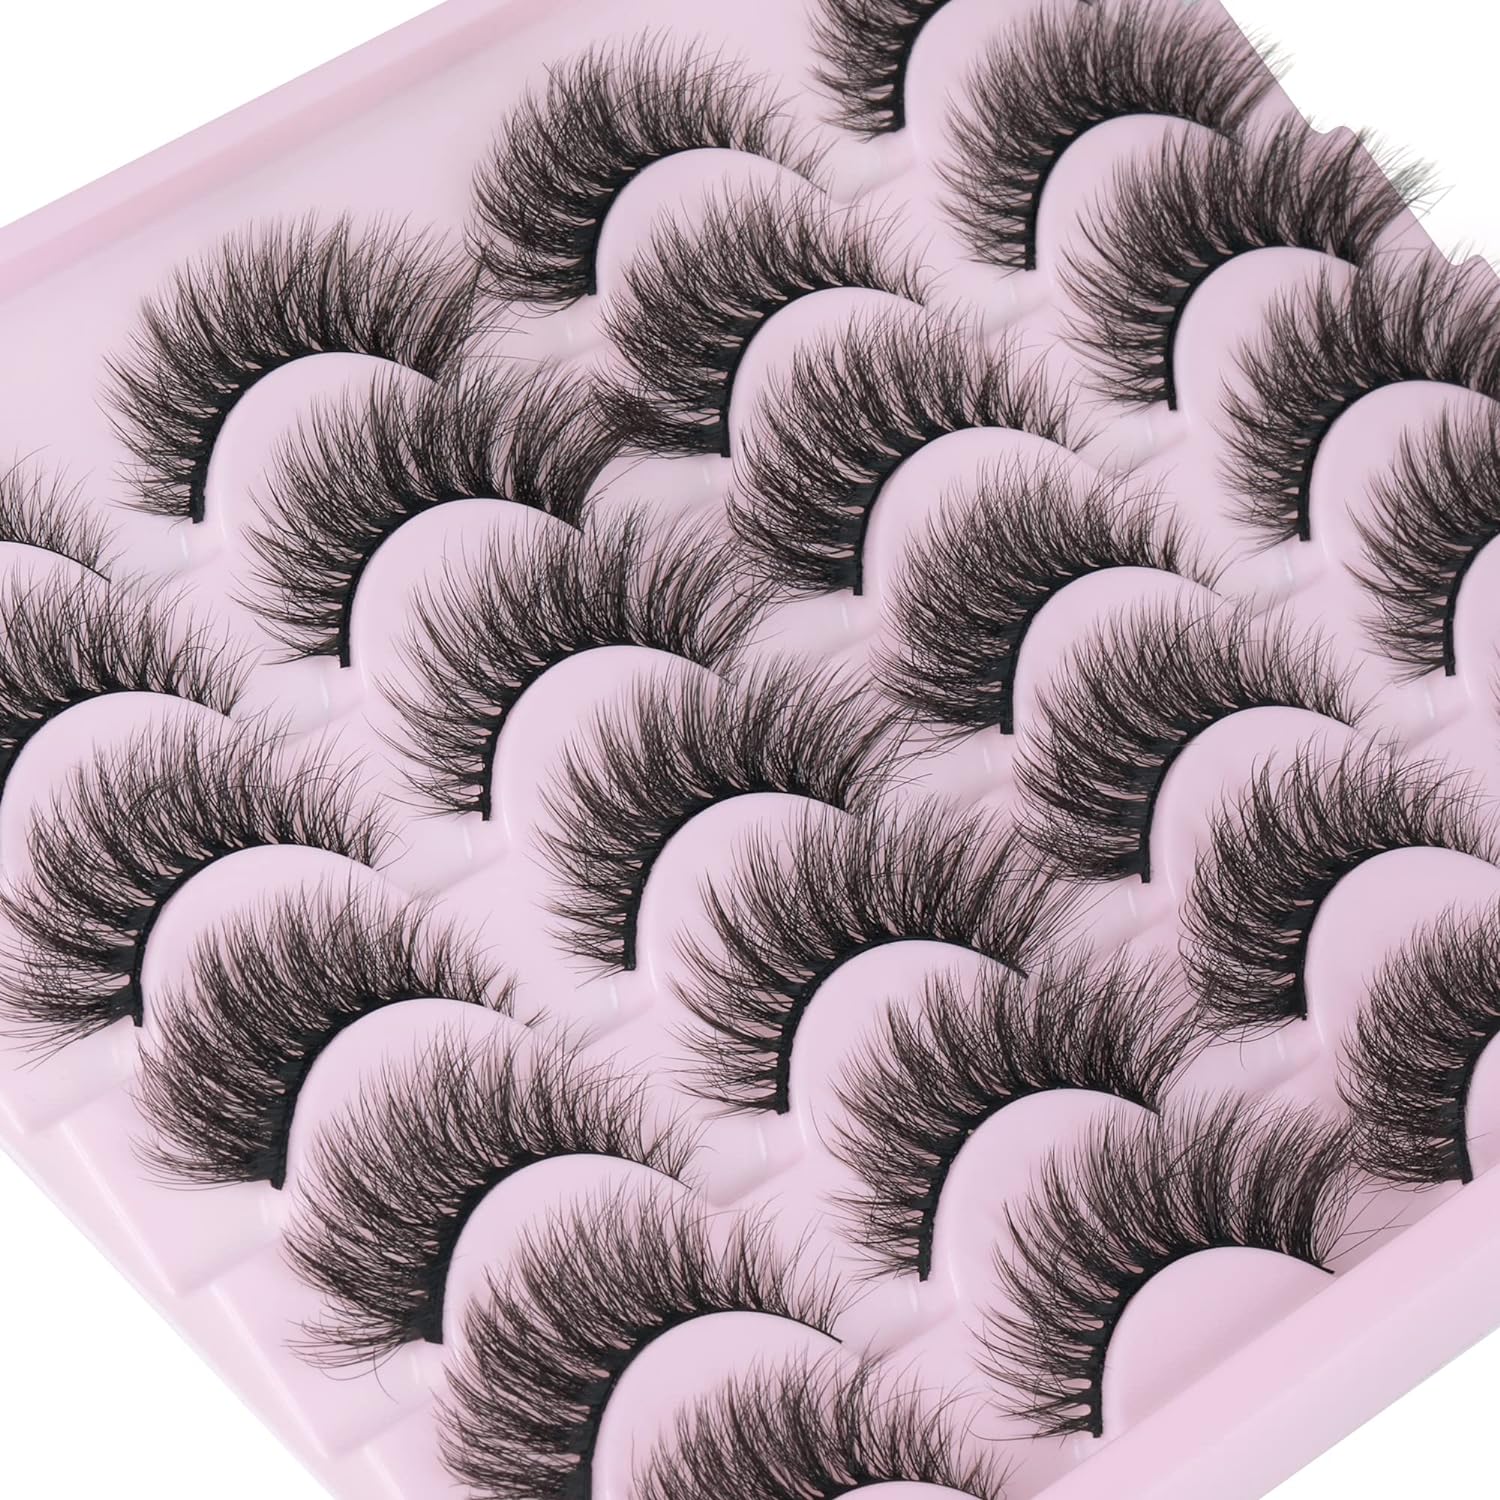 14 Pairs Wispy Mink Lashes Fluffy Eye Lashes Natural Look 5D Volume 16mm Fake Eyelashes Pack by TNFVLONEINS